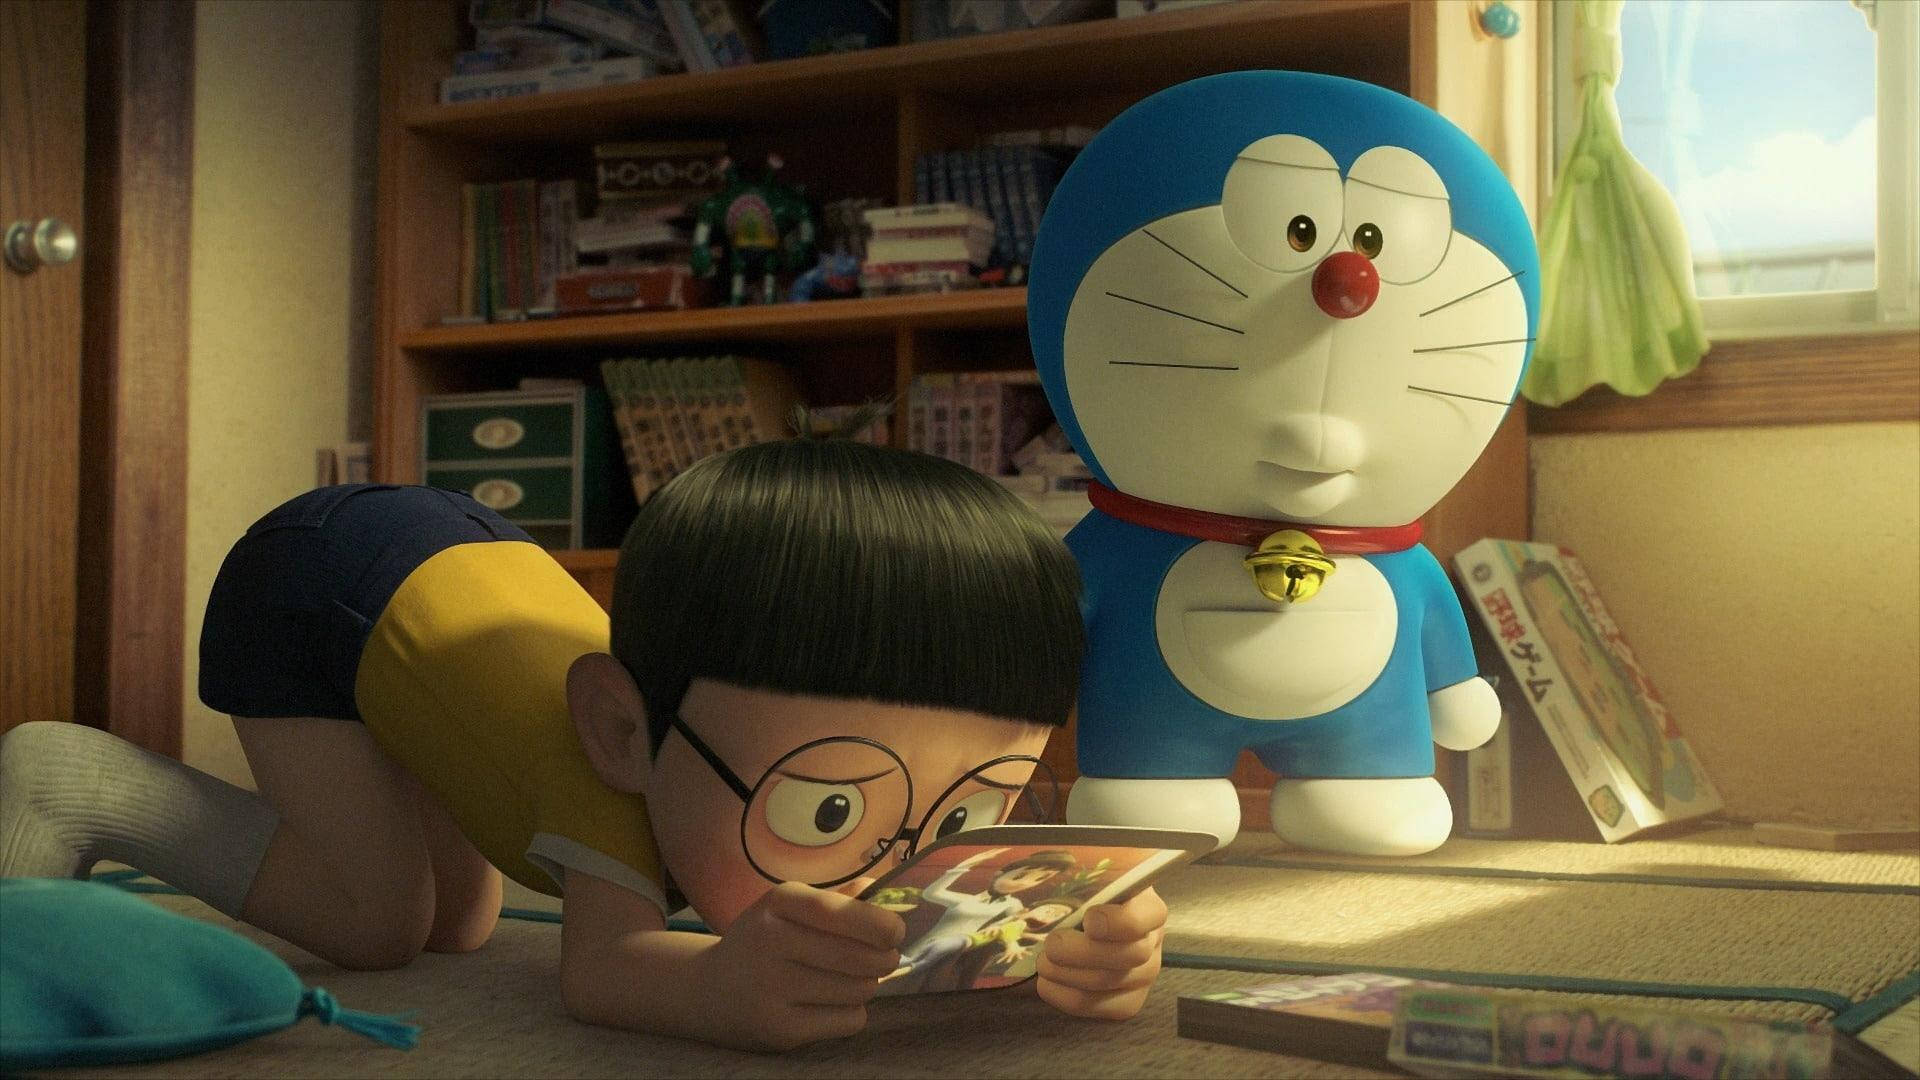 Download Cute Nobita Worried About Photo Wallpaper 